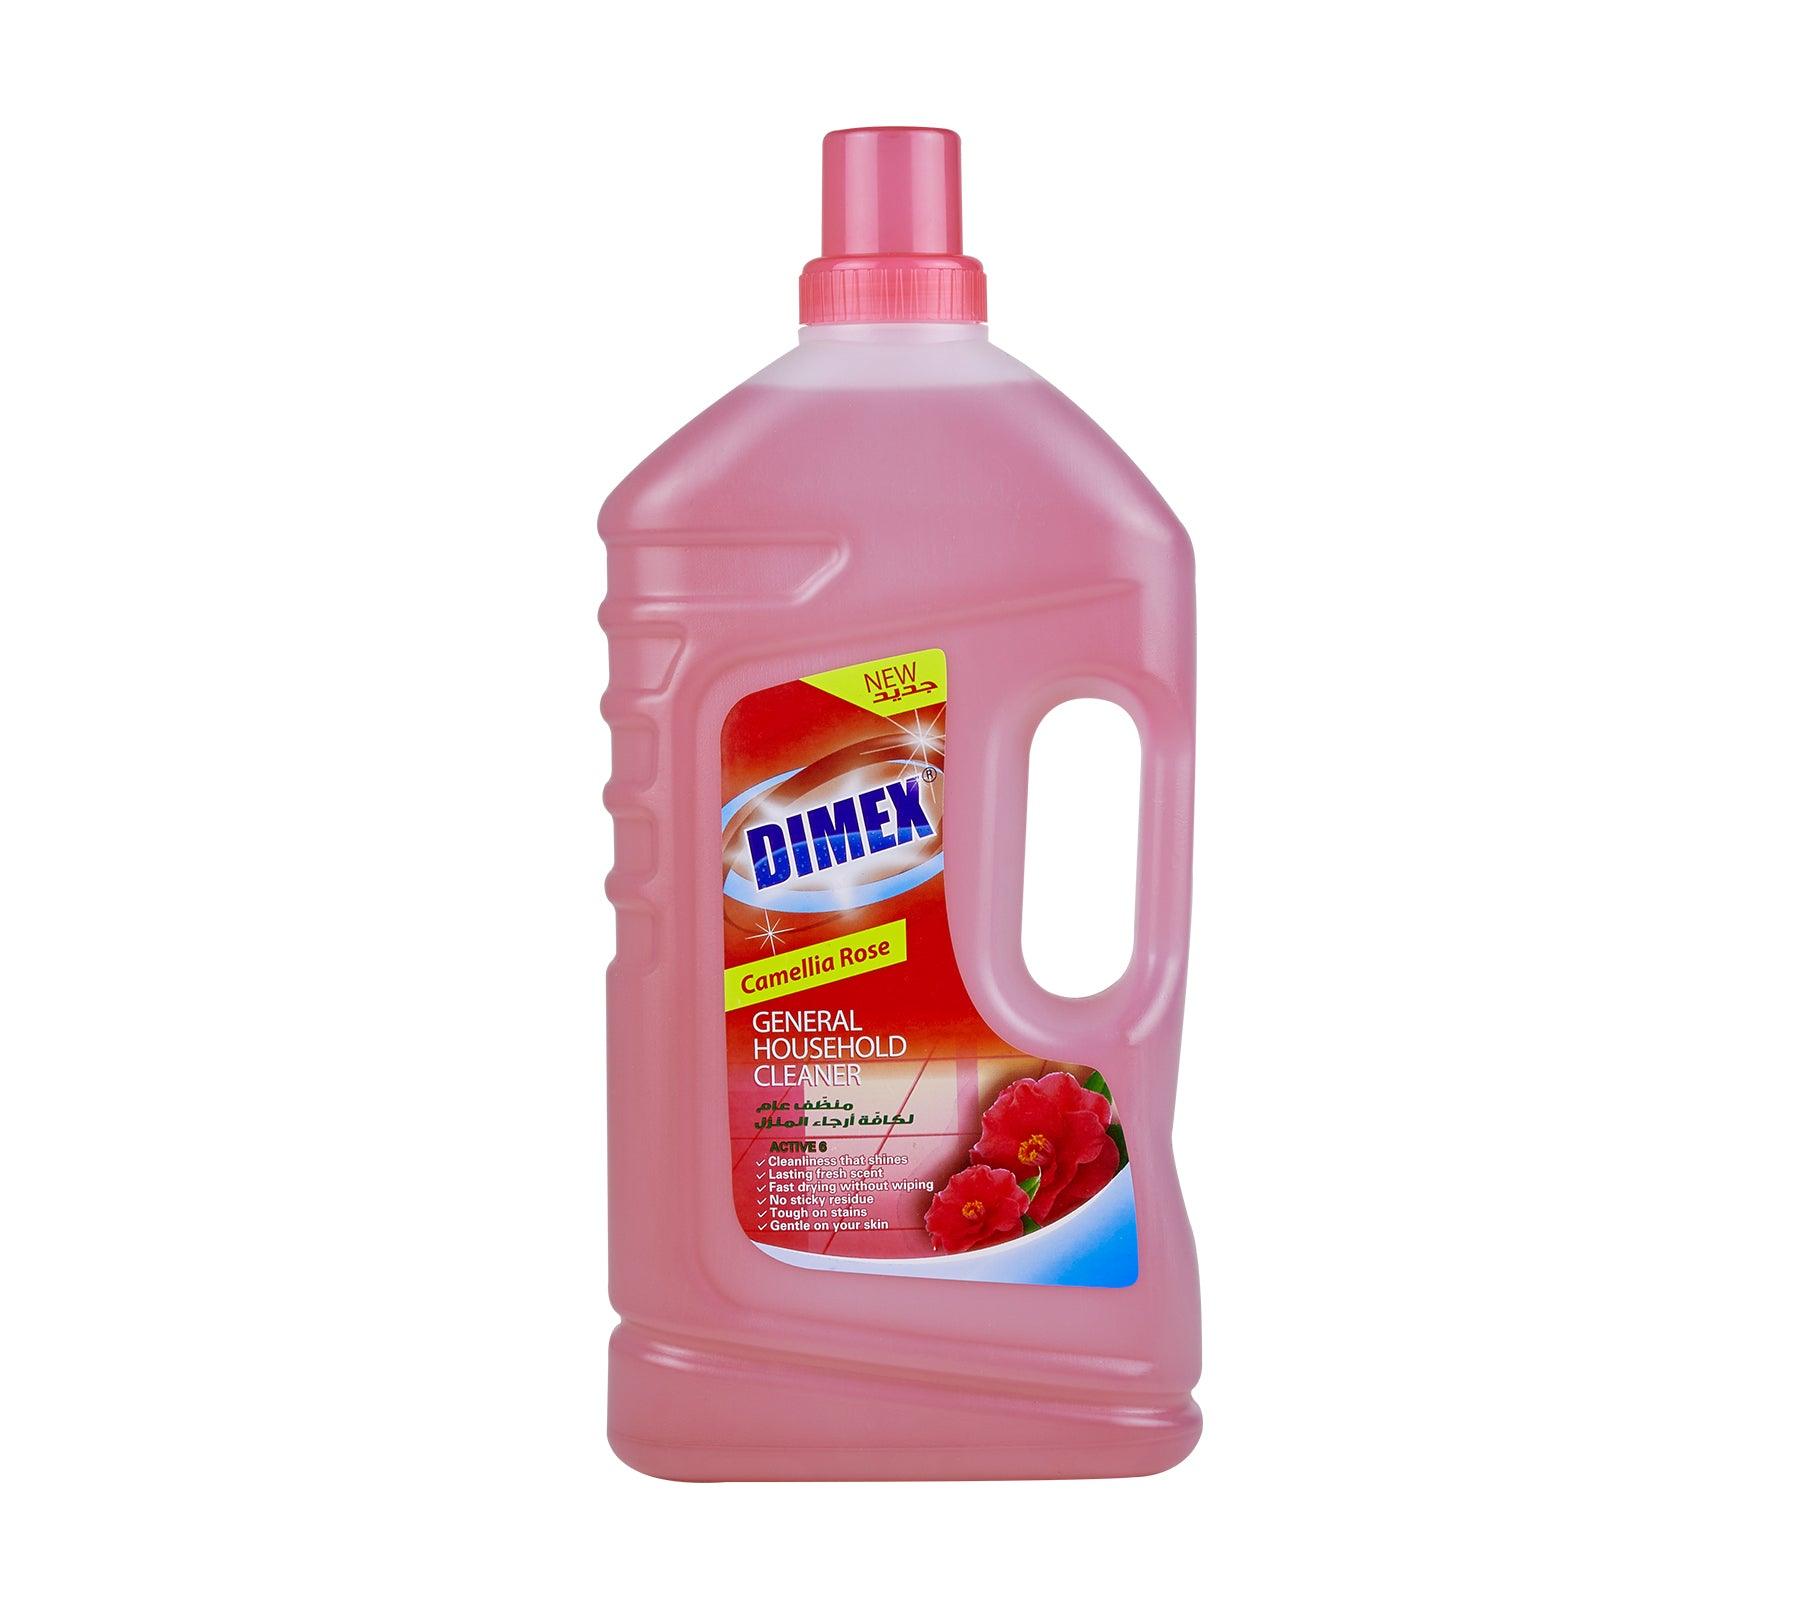 Elsada Dimex General Household Cleaner Camelia Rose 800ml - Karout Online -Karout Online Shopping In lebanon - Karout Express Delivery 